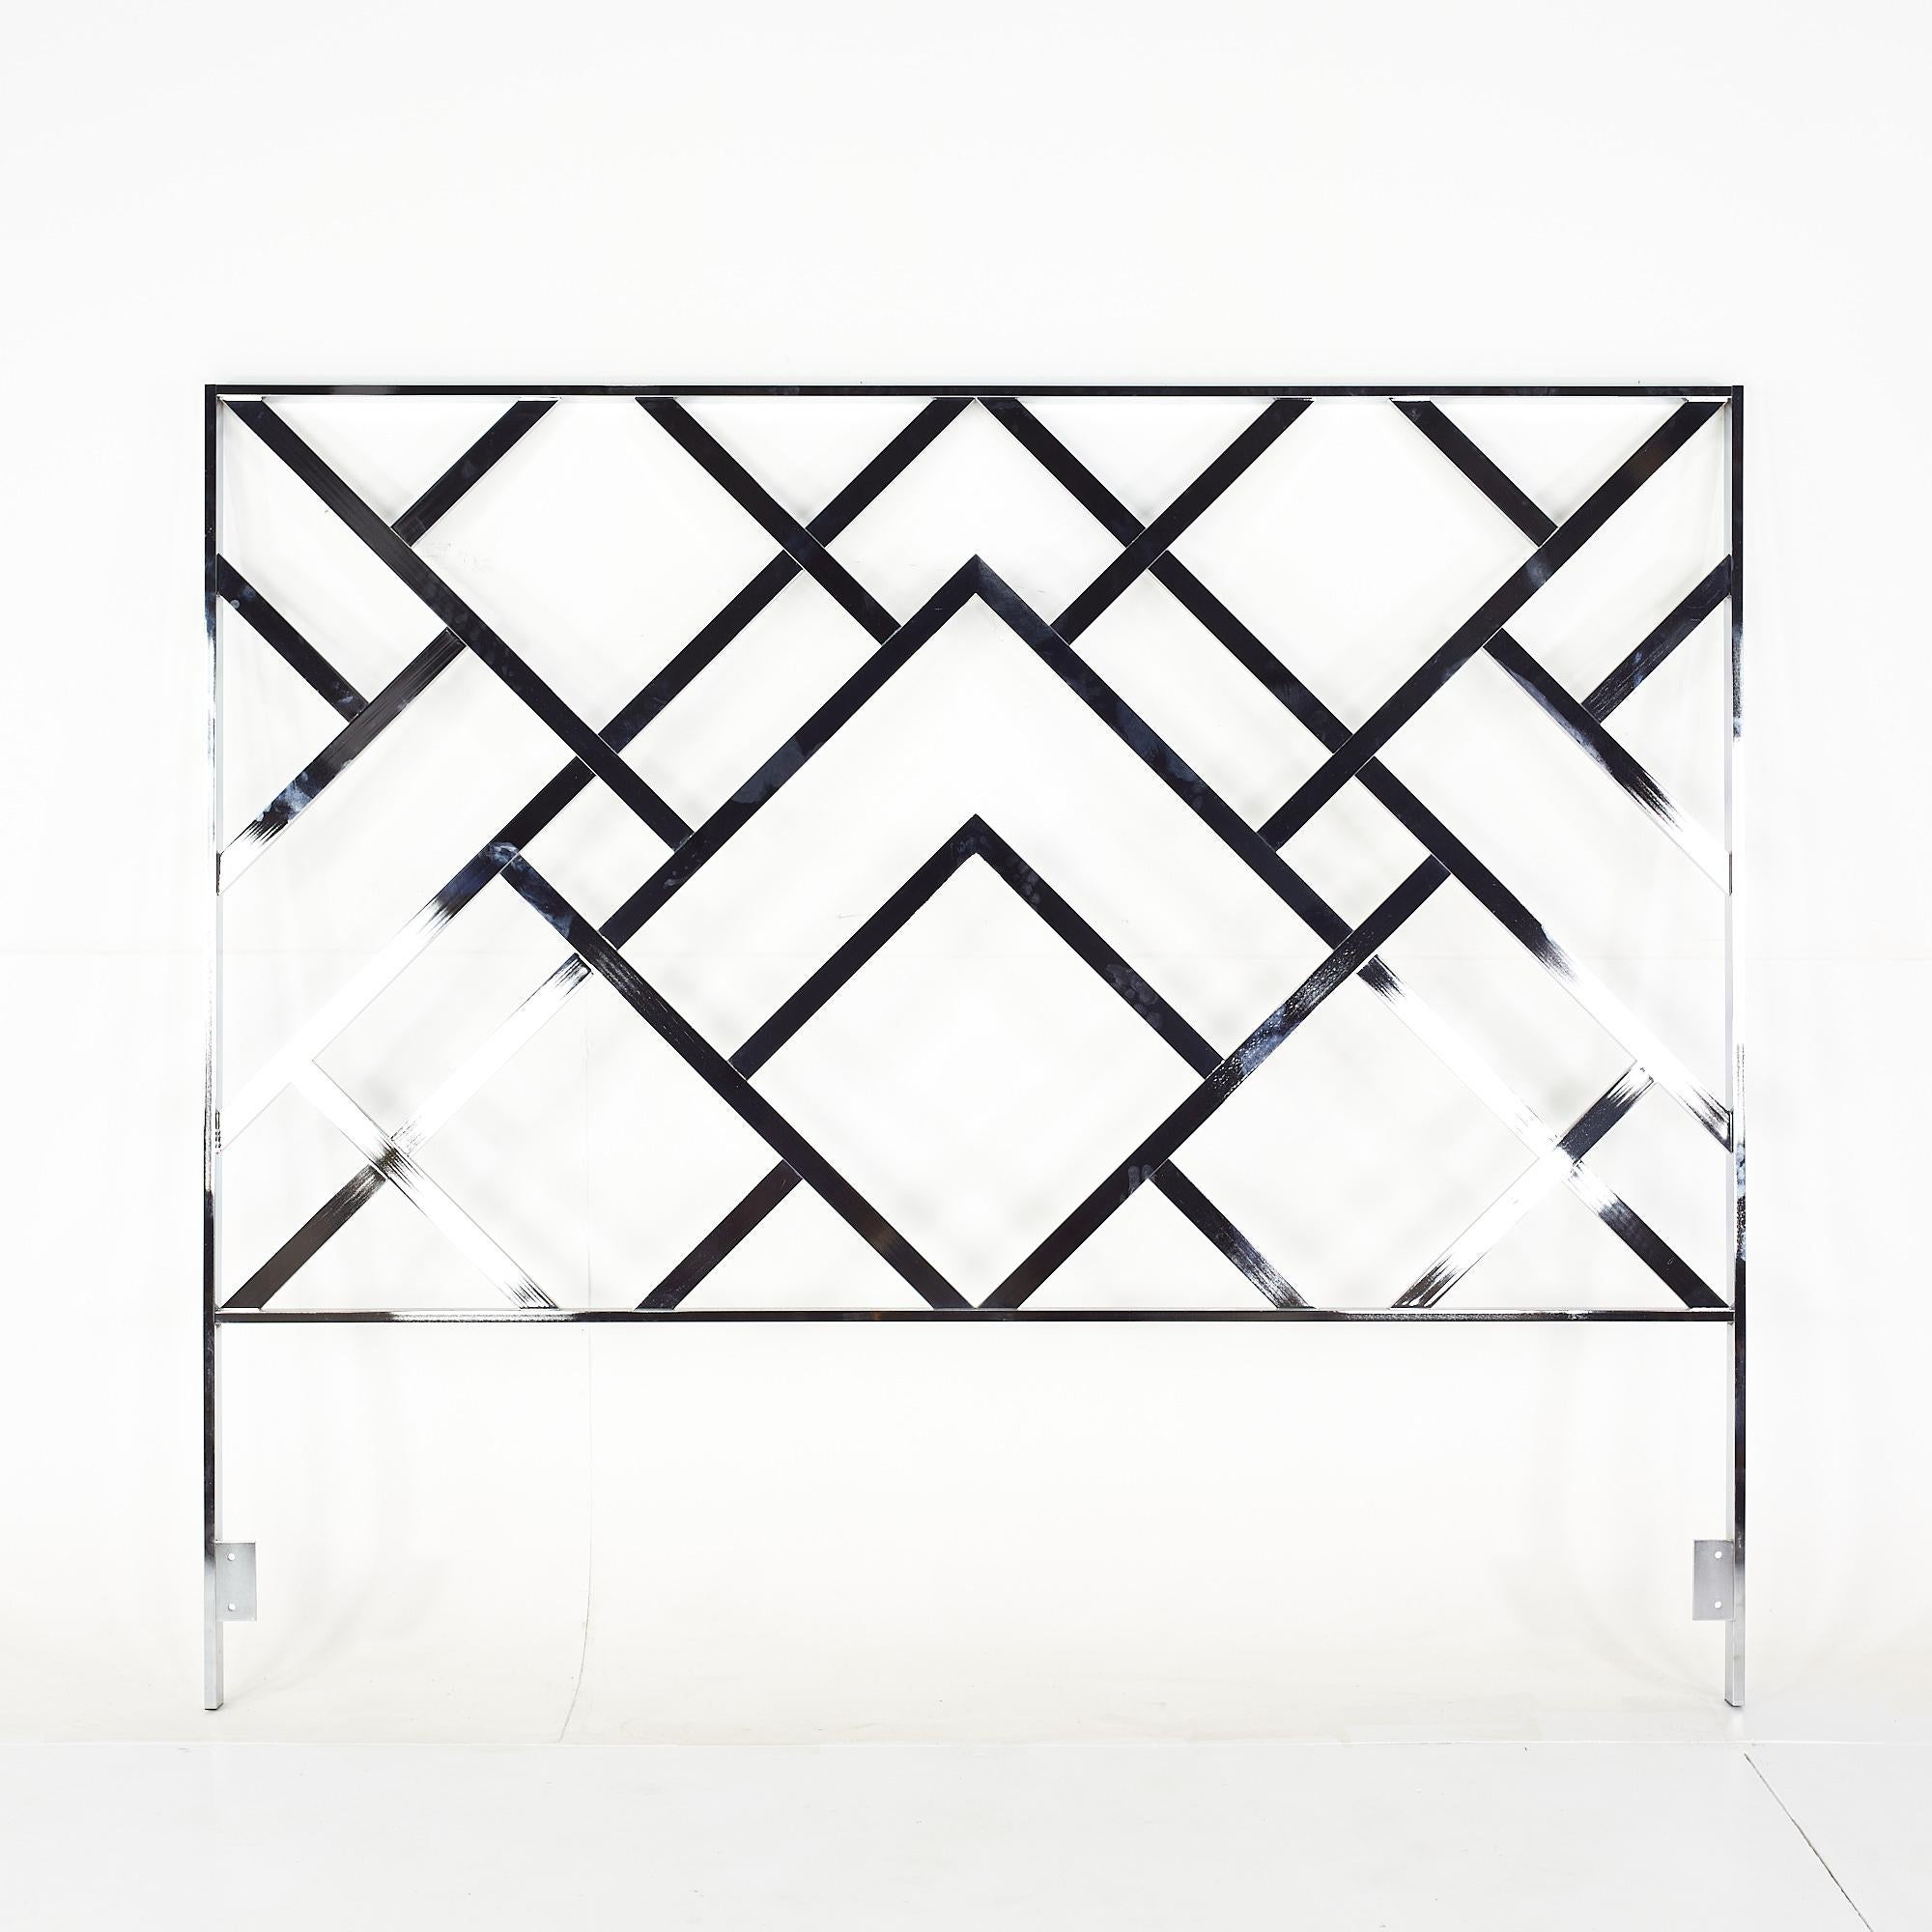 Milo Baughman style mid century chrome king headboard

This headboard measures: 77.75 wide x 1.5 deep x 67 inches high

All pieces of furniture can be had in what we call restored vintage condition. That means the piece is restored upon purchase